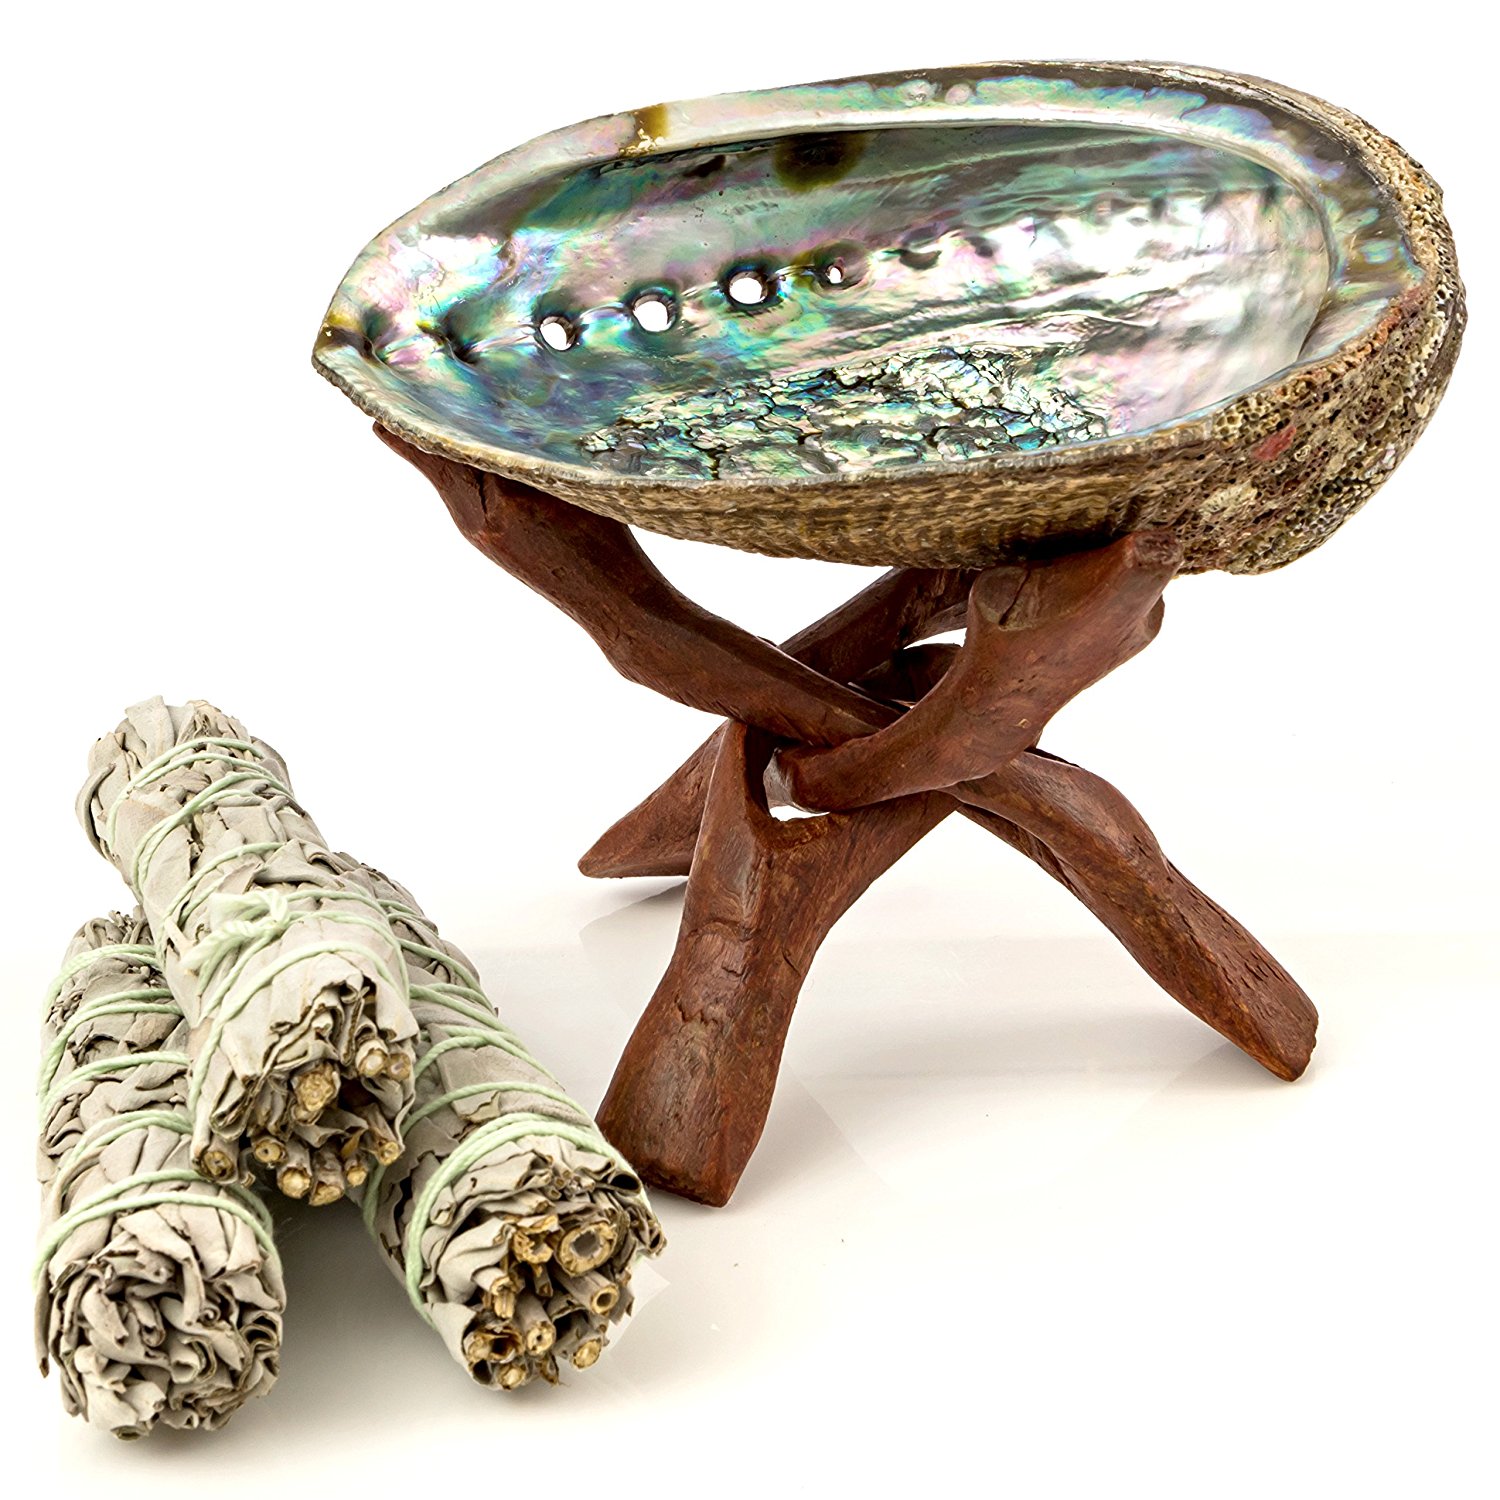 Sage Clearing Kit to Clear Negative Energy